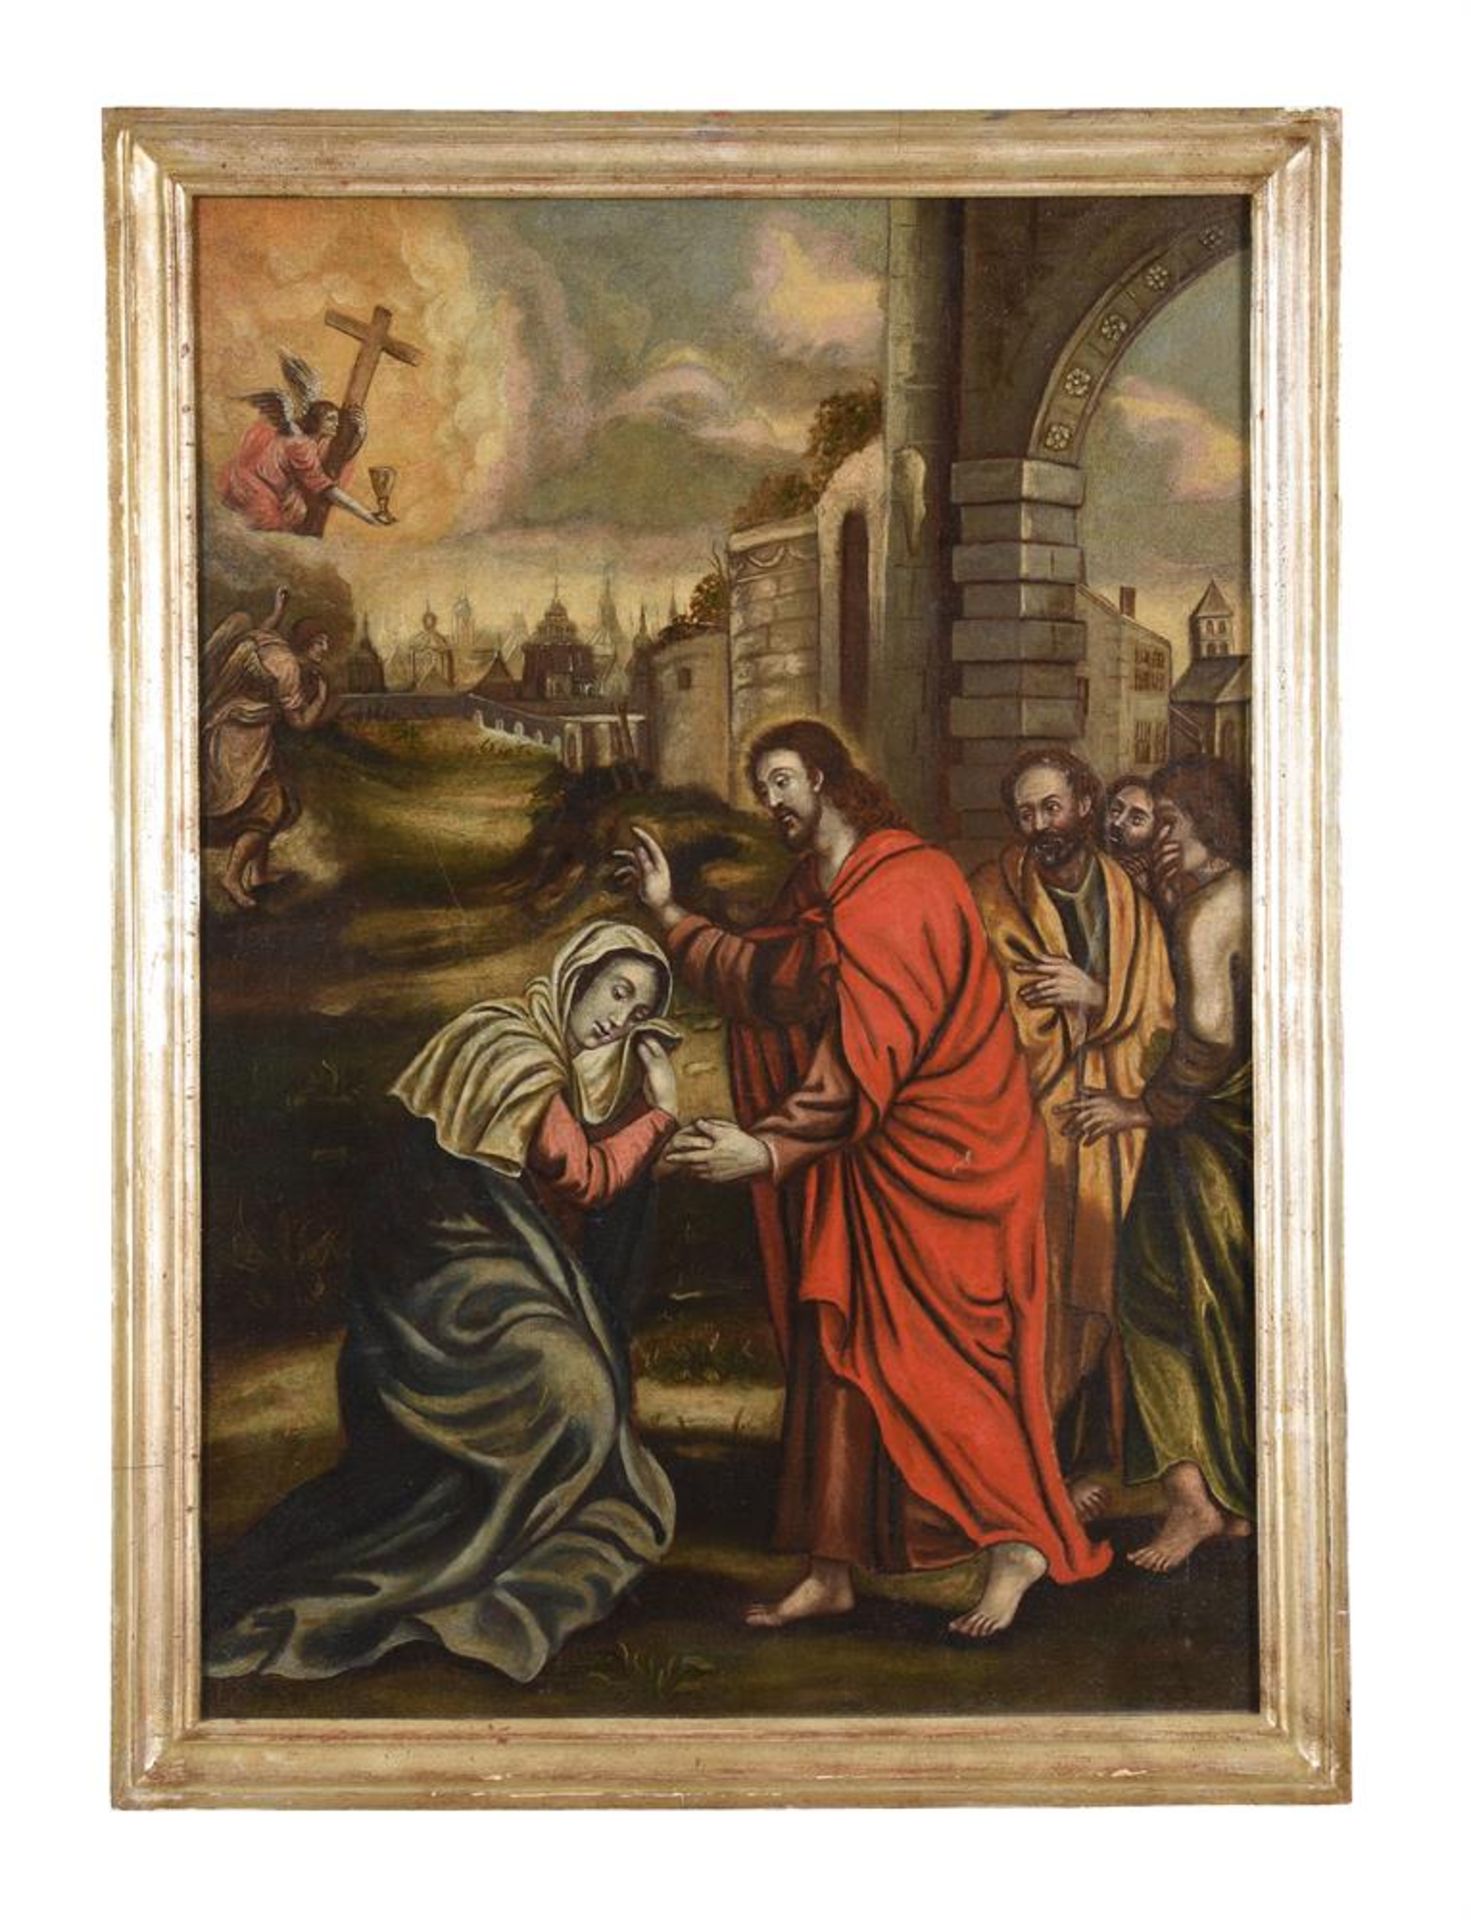 Follower of Doménikos Theotokópoulos, known as El Greco, 'Christ appearing before Mary Magdelene'